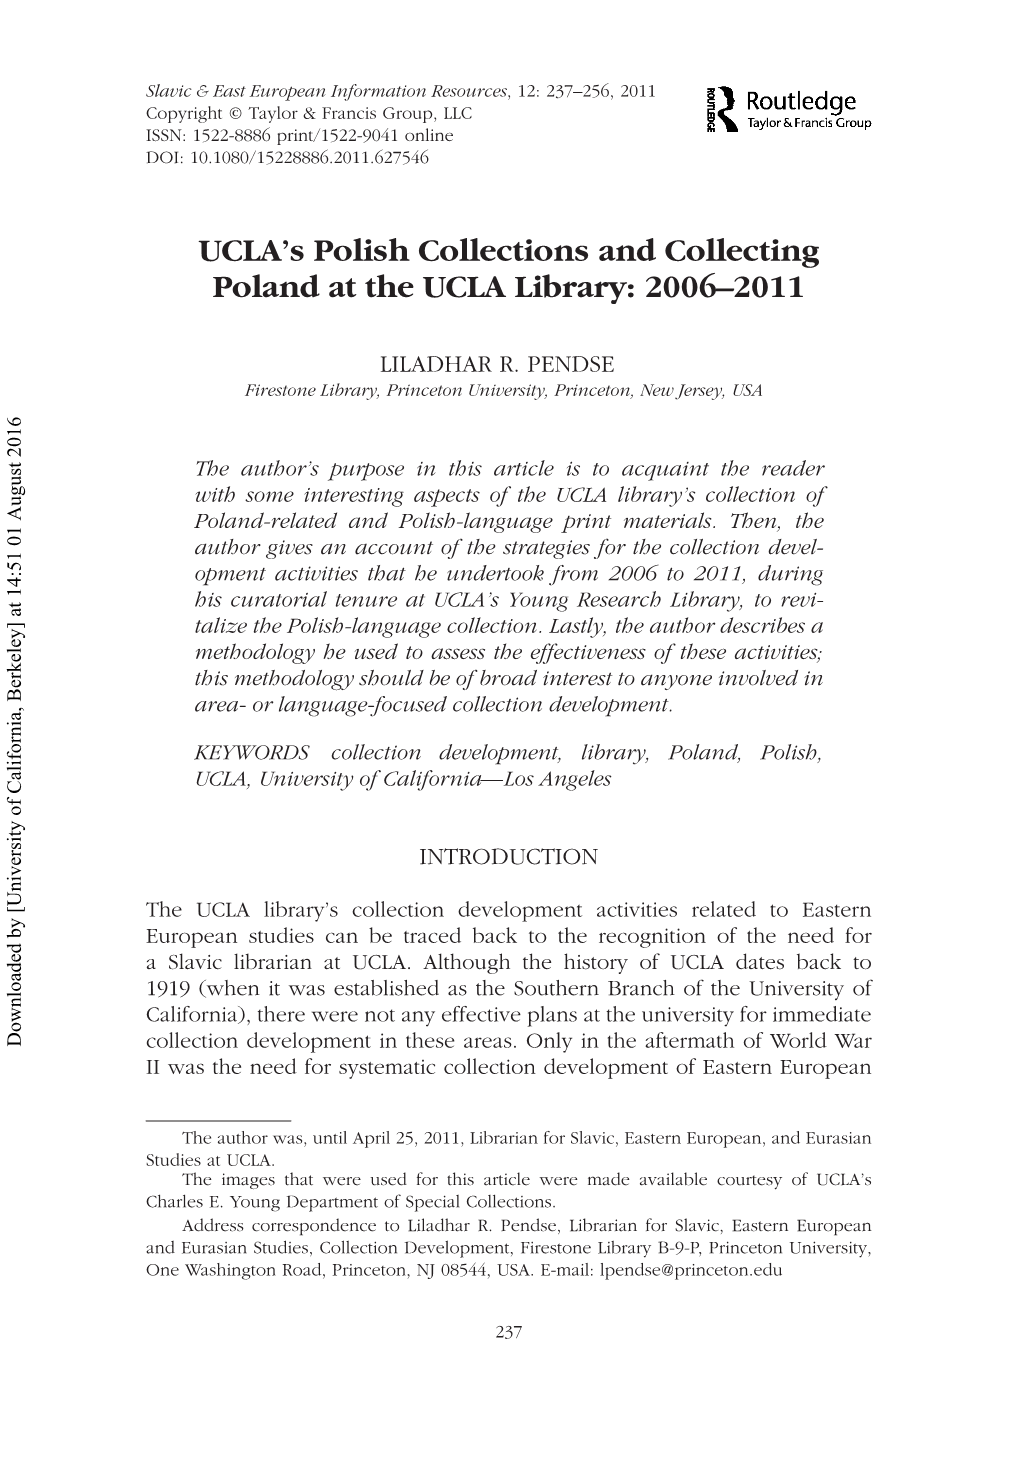 UCLA's Polish Collections and Collecting Poland at the UCLA Library